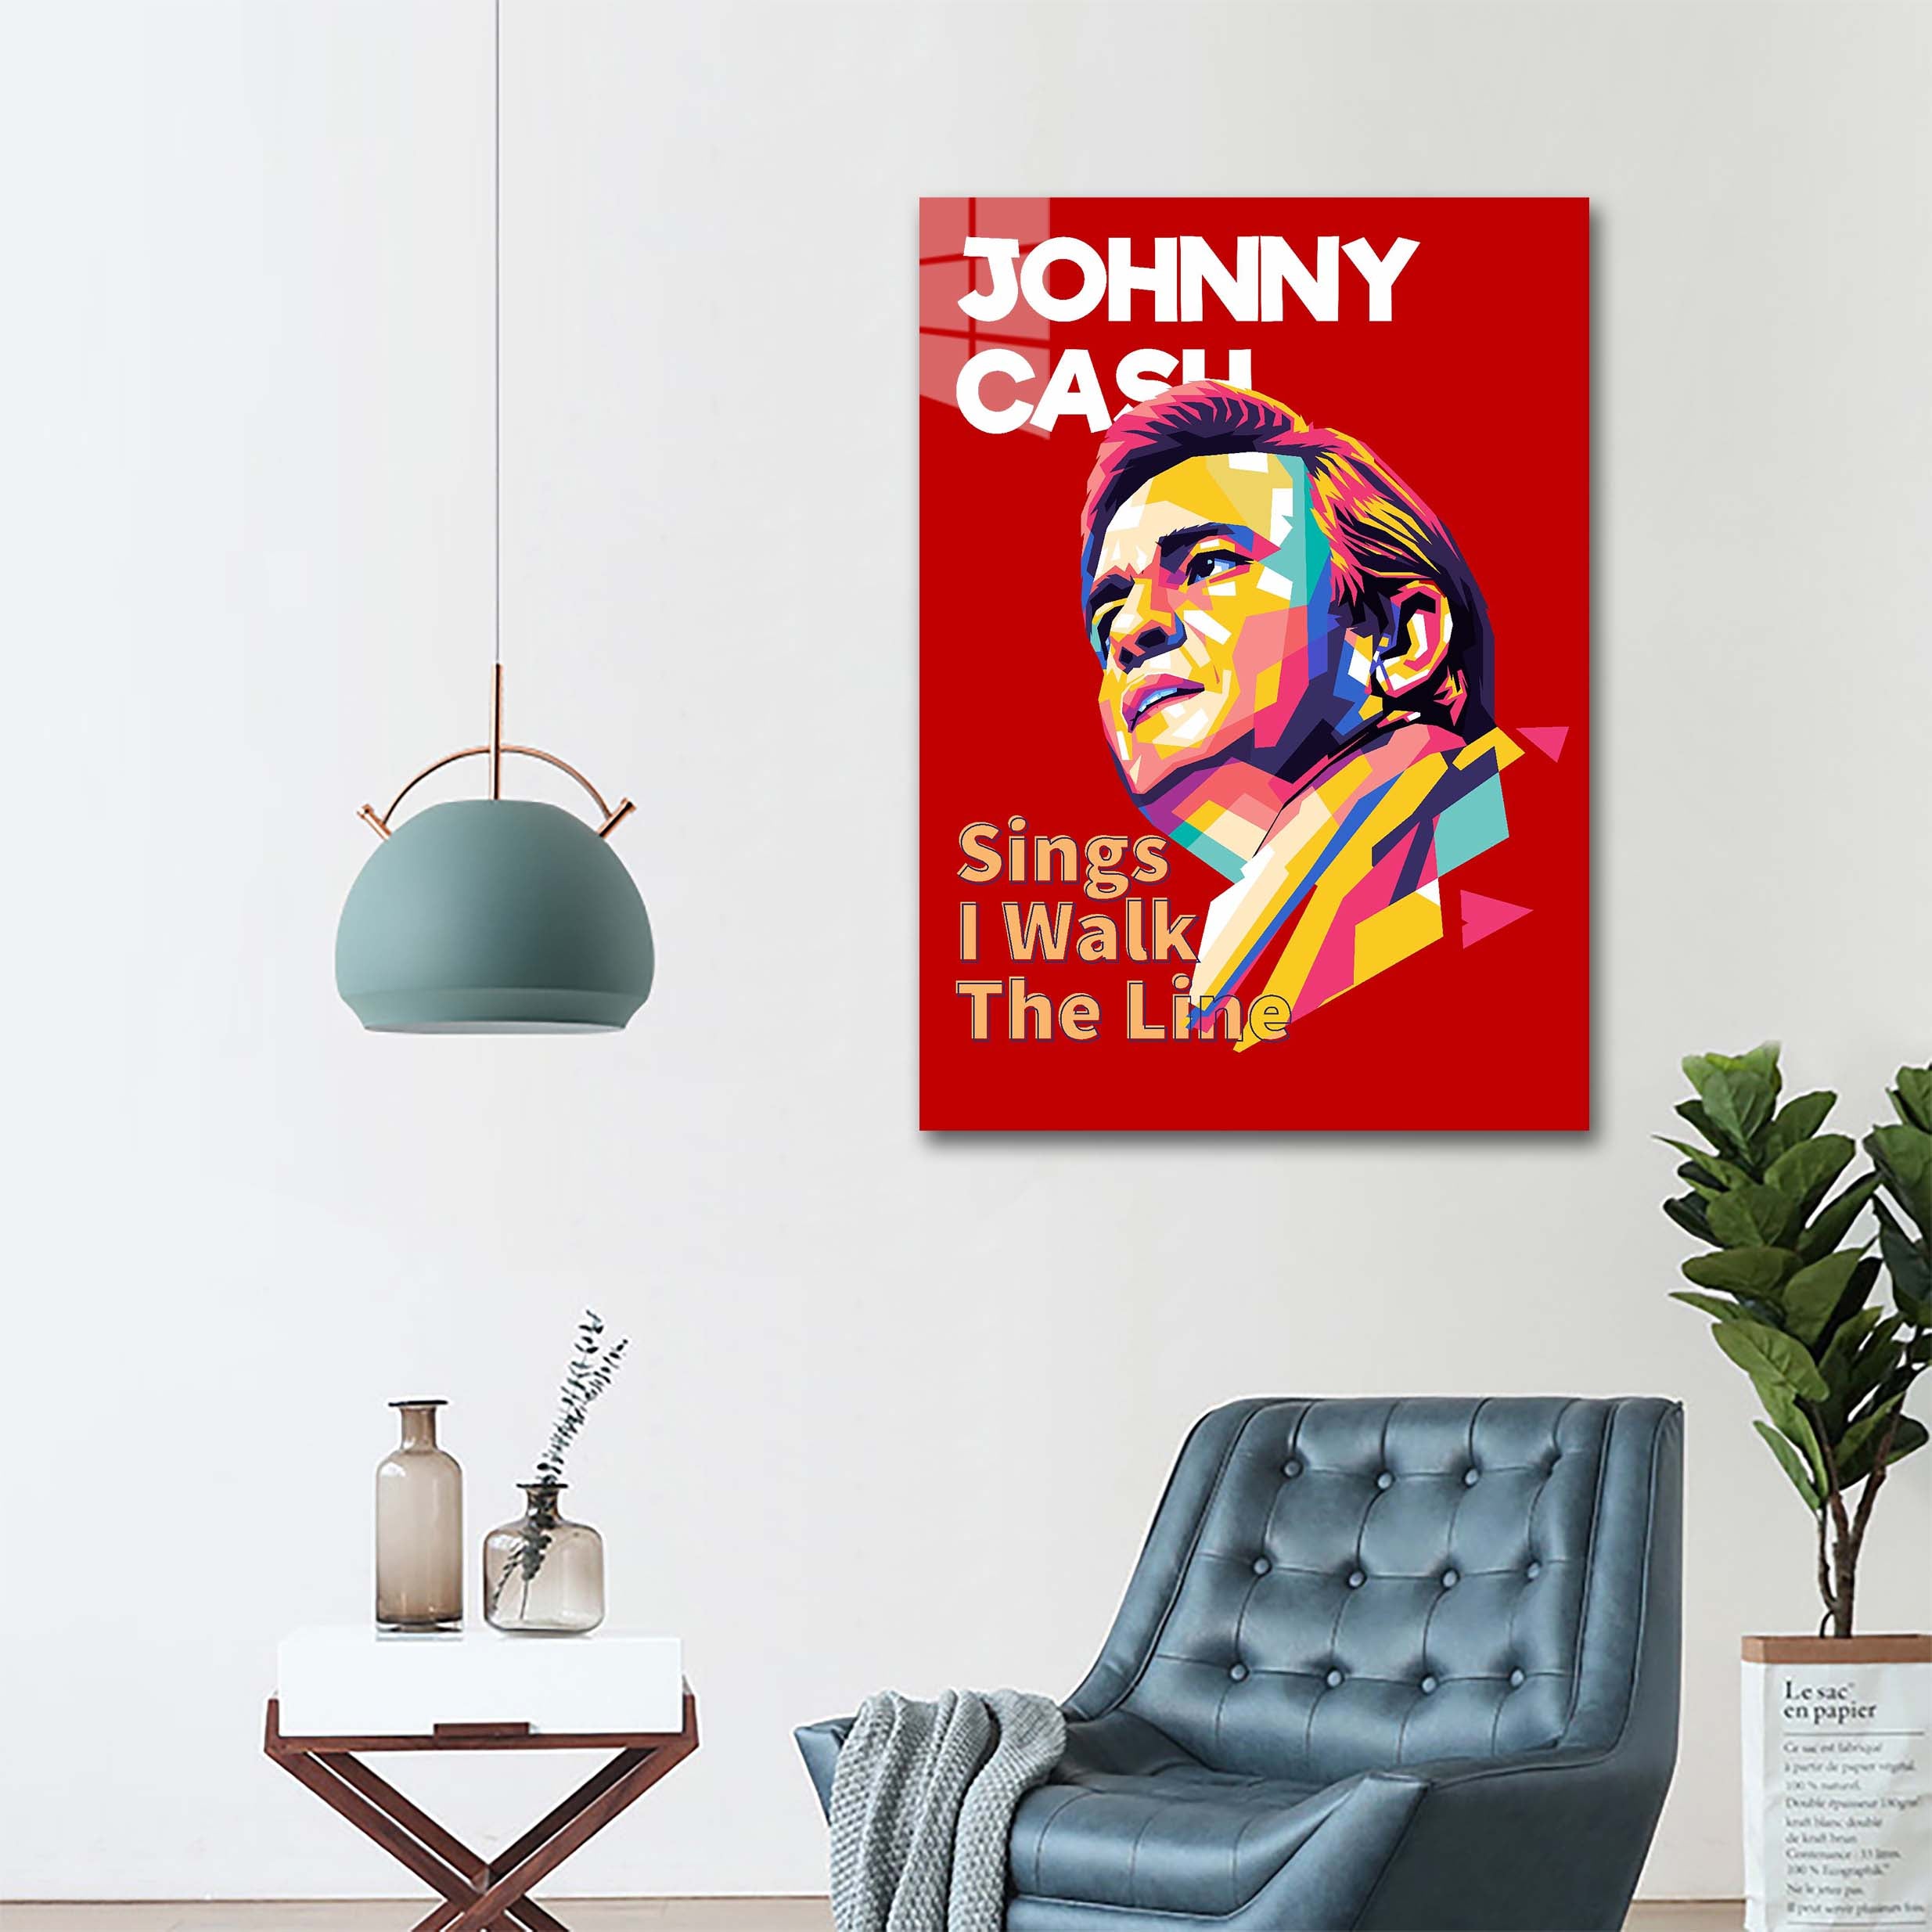 Johnny Cash-01-designed by @Wpapmalang